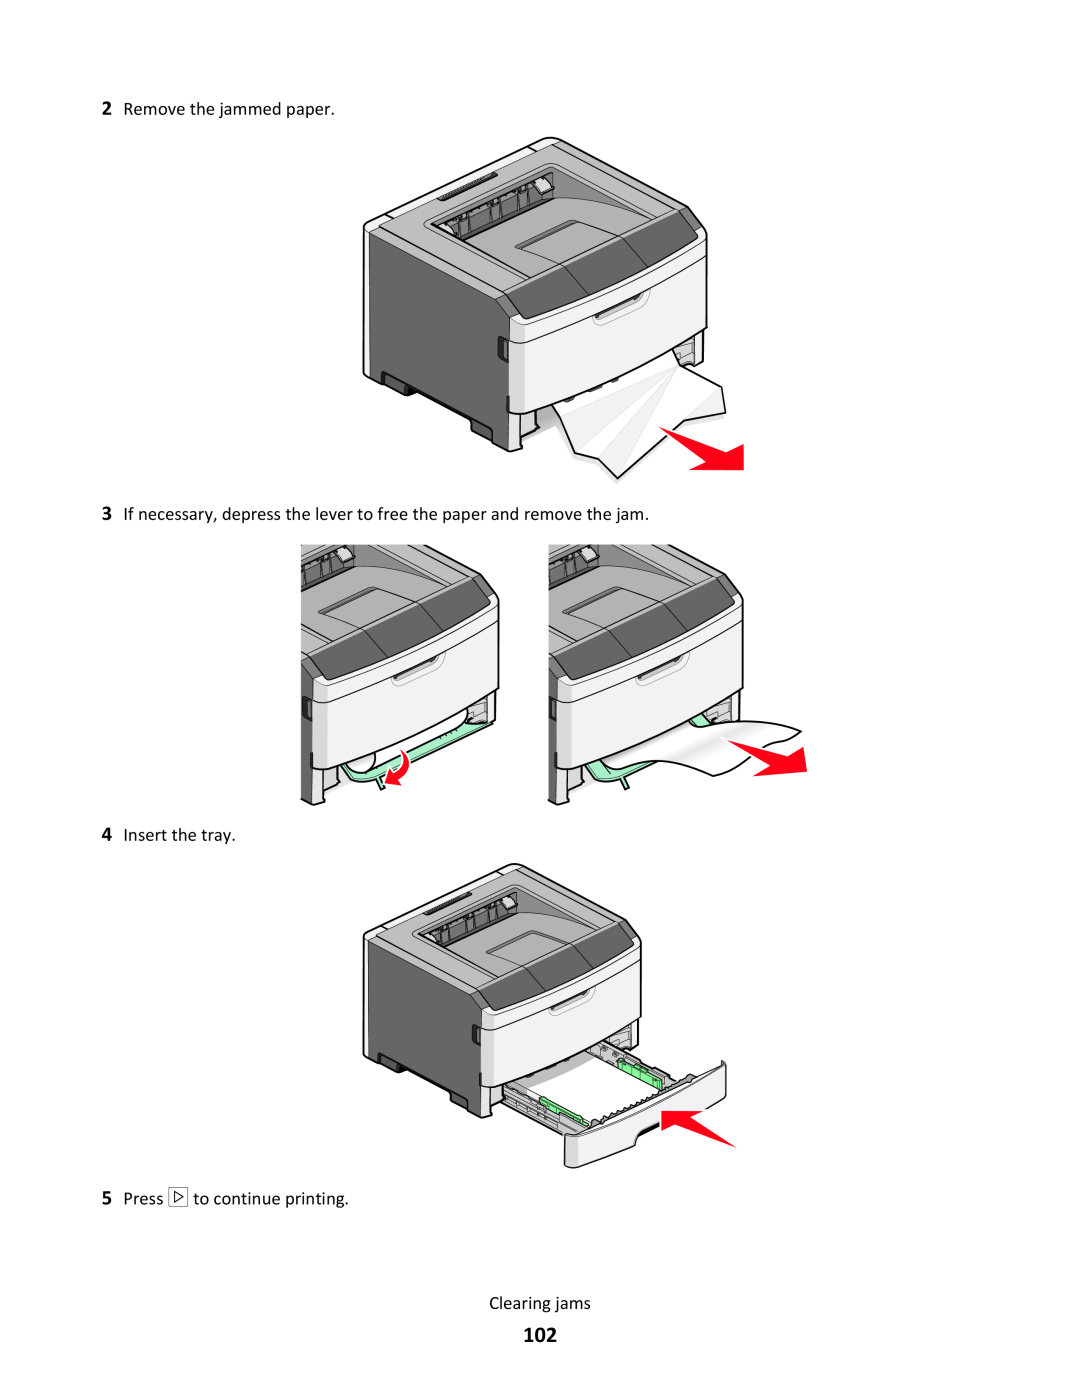 Lexmark 34S0300, 34S0100, 34S0305 manual Remove the jammed paper, Insert the tray 5 Press to continue printing Clearing jams 